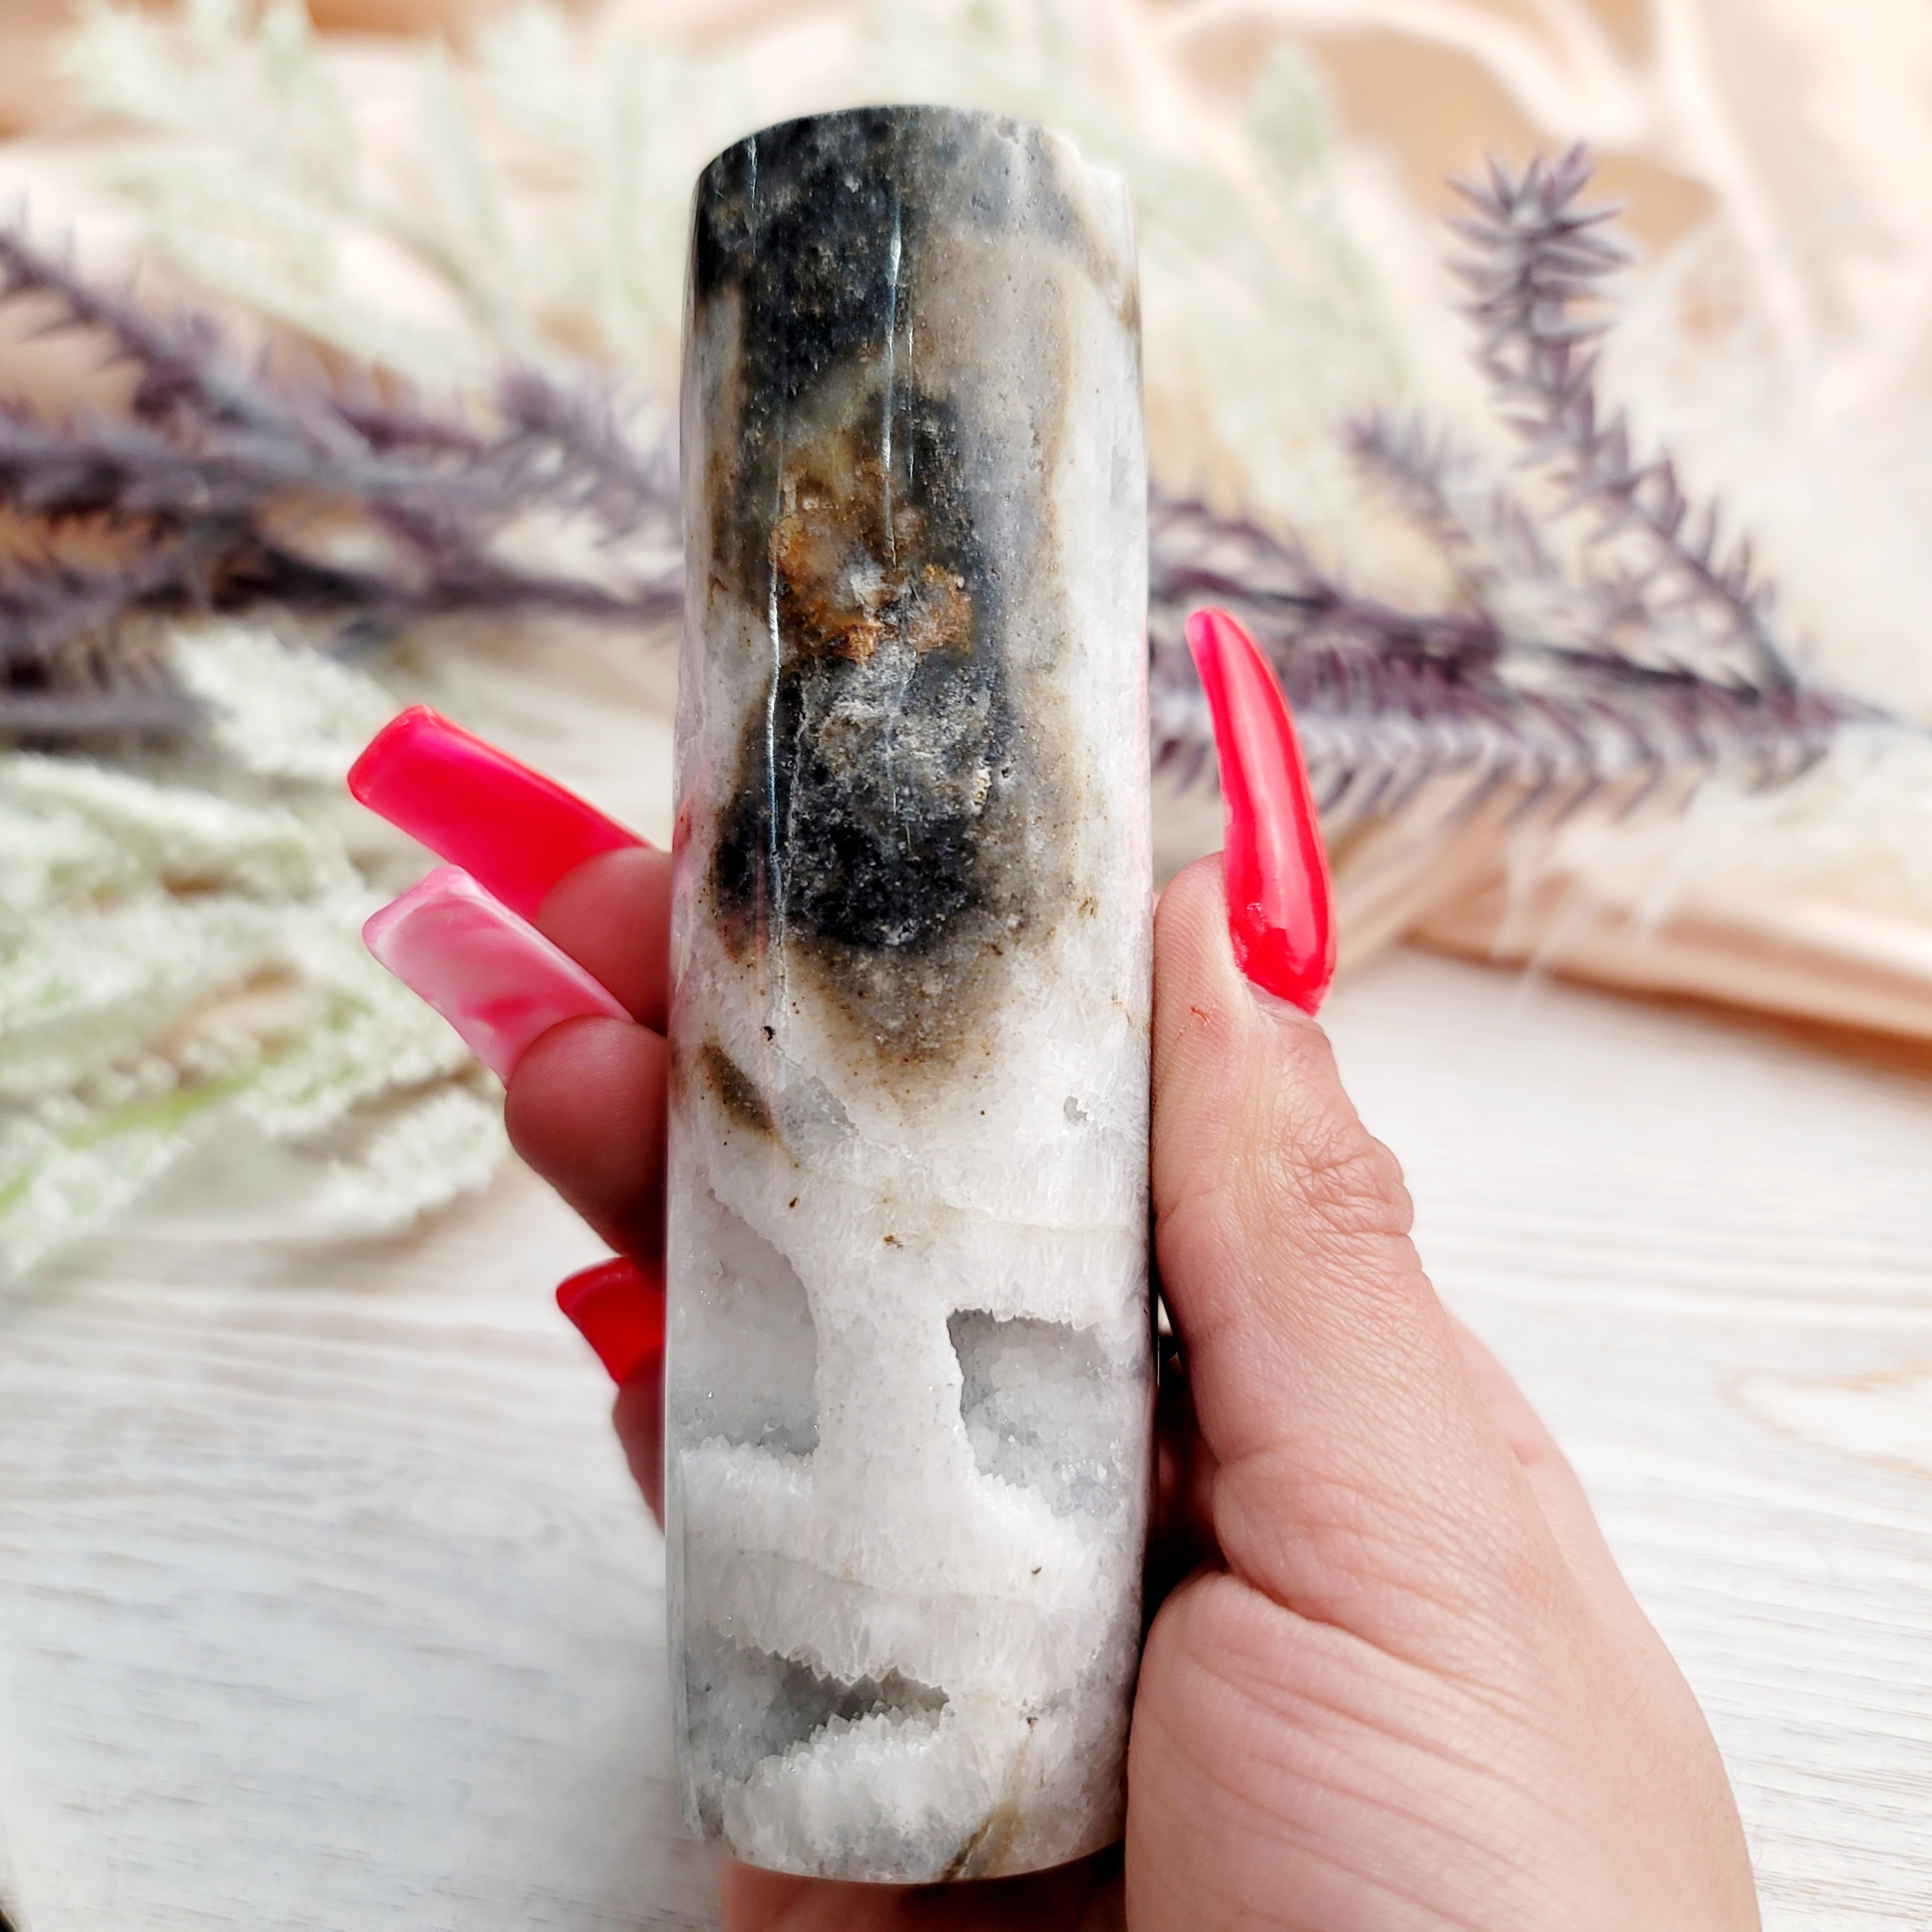 Zebra Agate Harmonizer for Balance, Clearing Blockages and Releasing Negativity